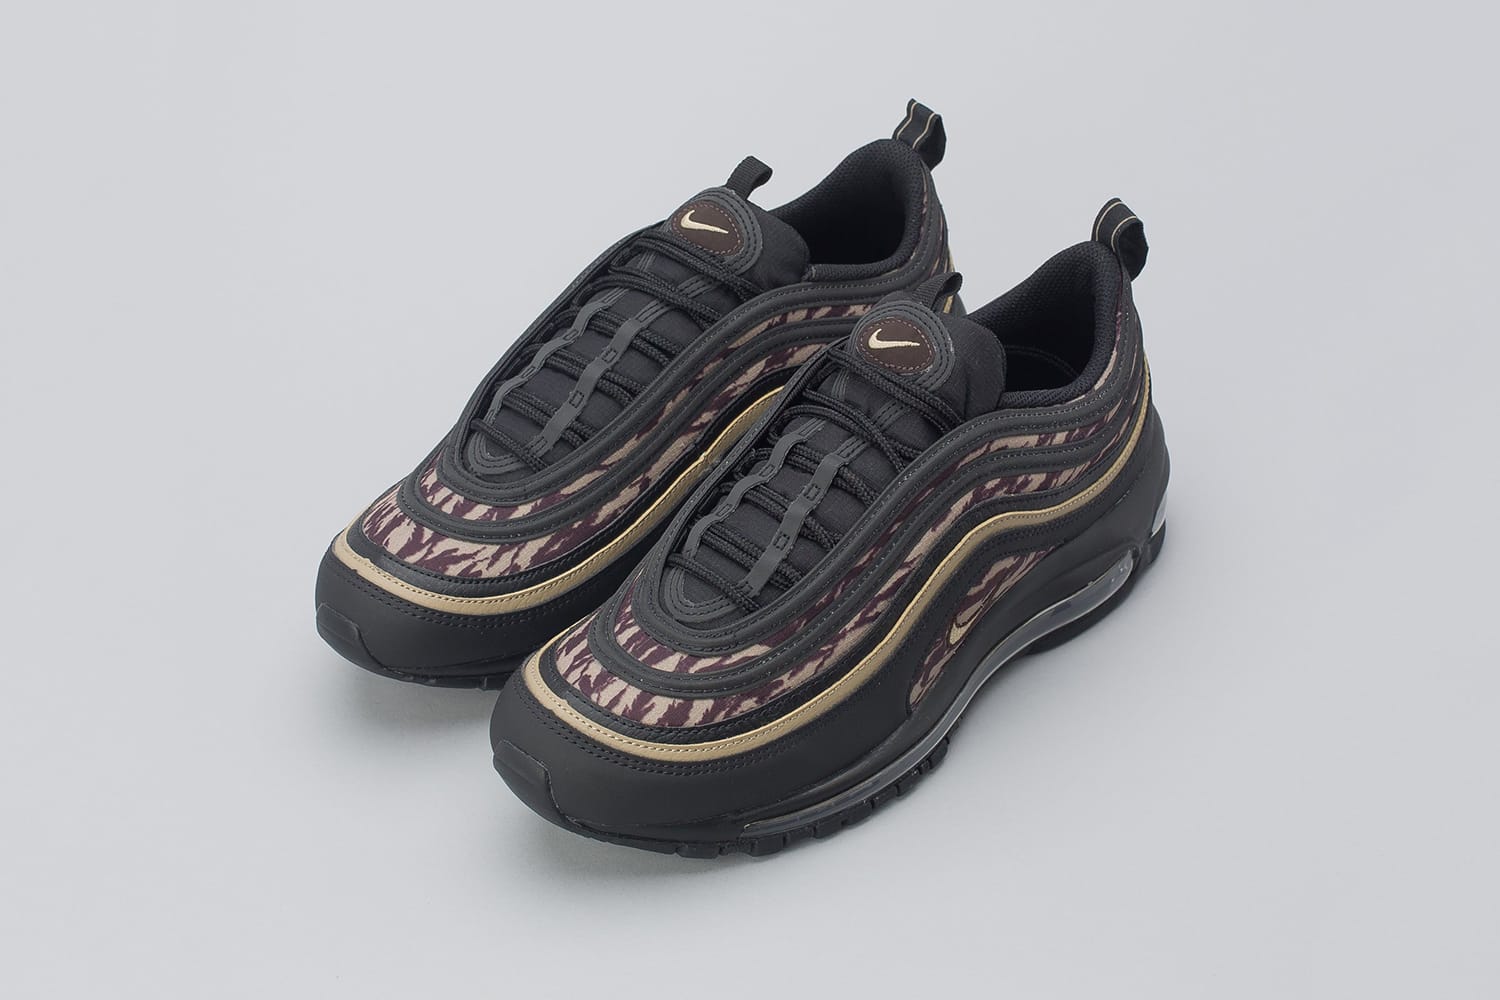 Nike's Air Max 97 “Tiger Camo” Release | HYPEBEAST